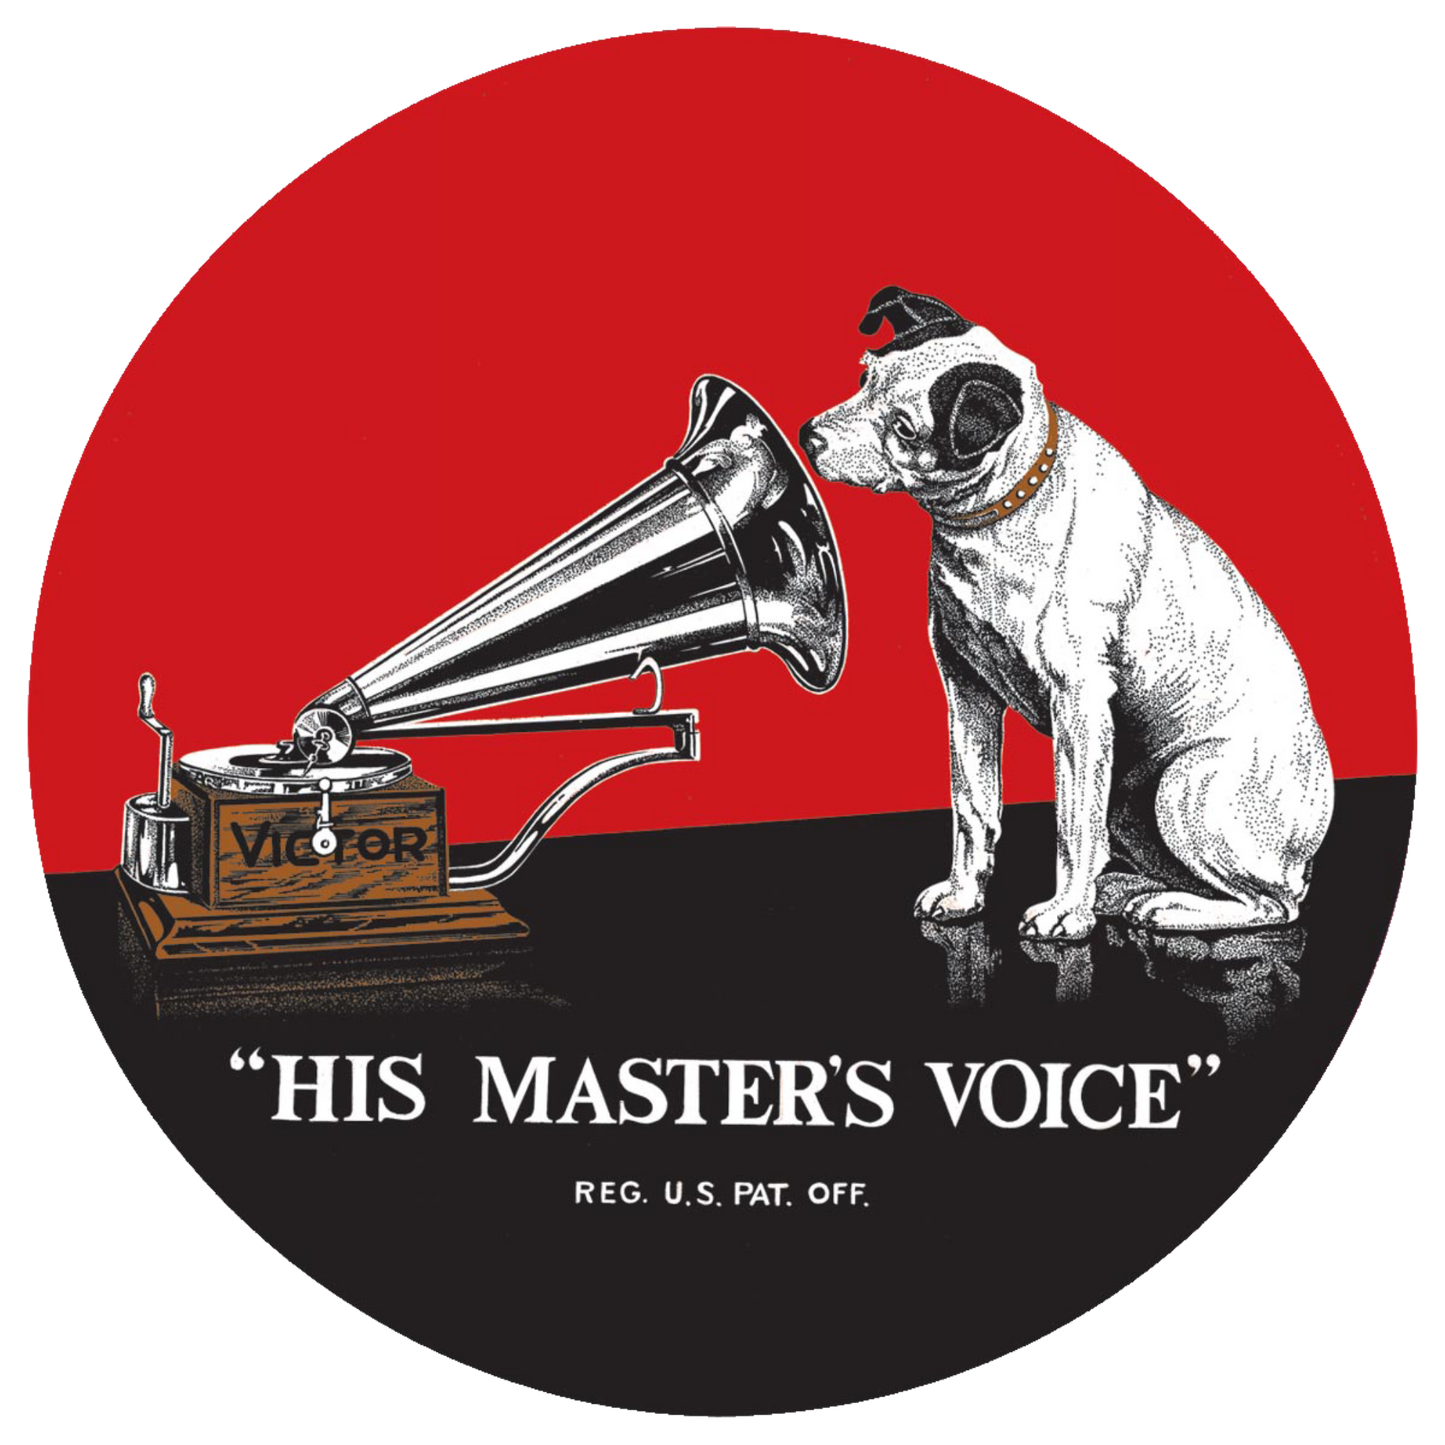 Classic Nipper the dog listening to a gramophone with "His Master's Voice" inscription on a round red tin sign.